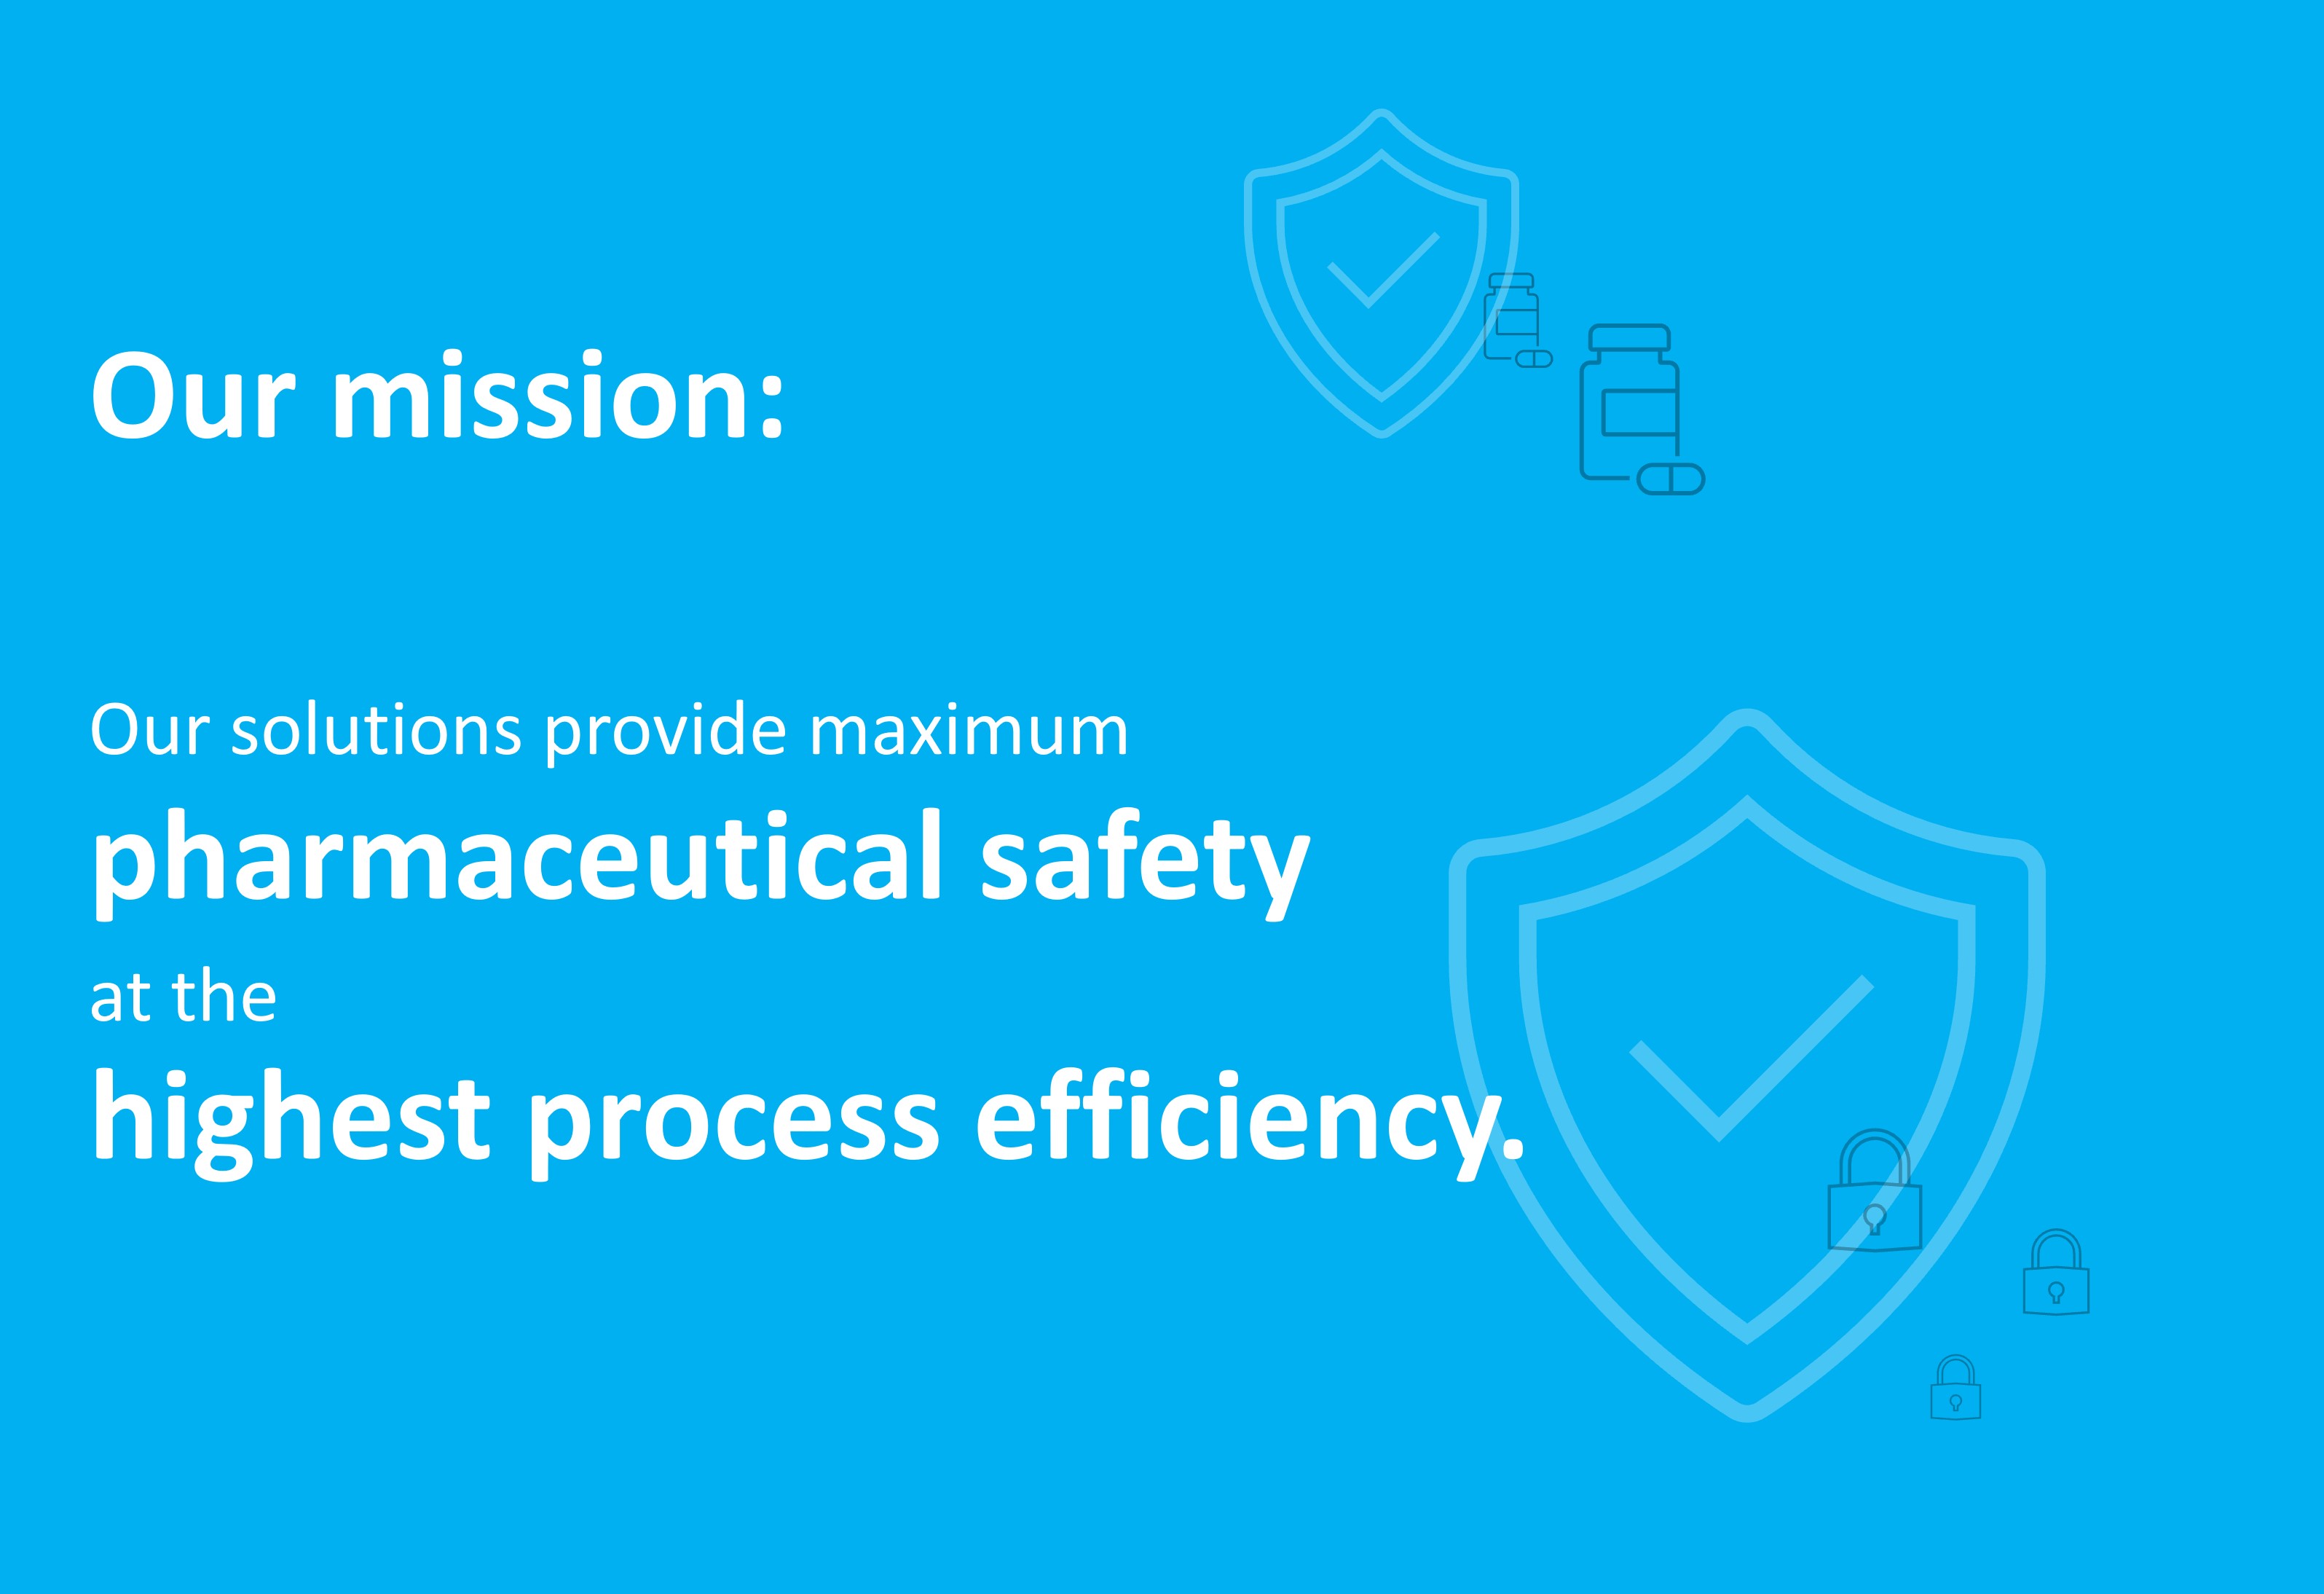 Our solutions provide maximum pharmaceutical safety at the highest process efficiency